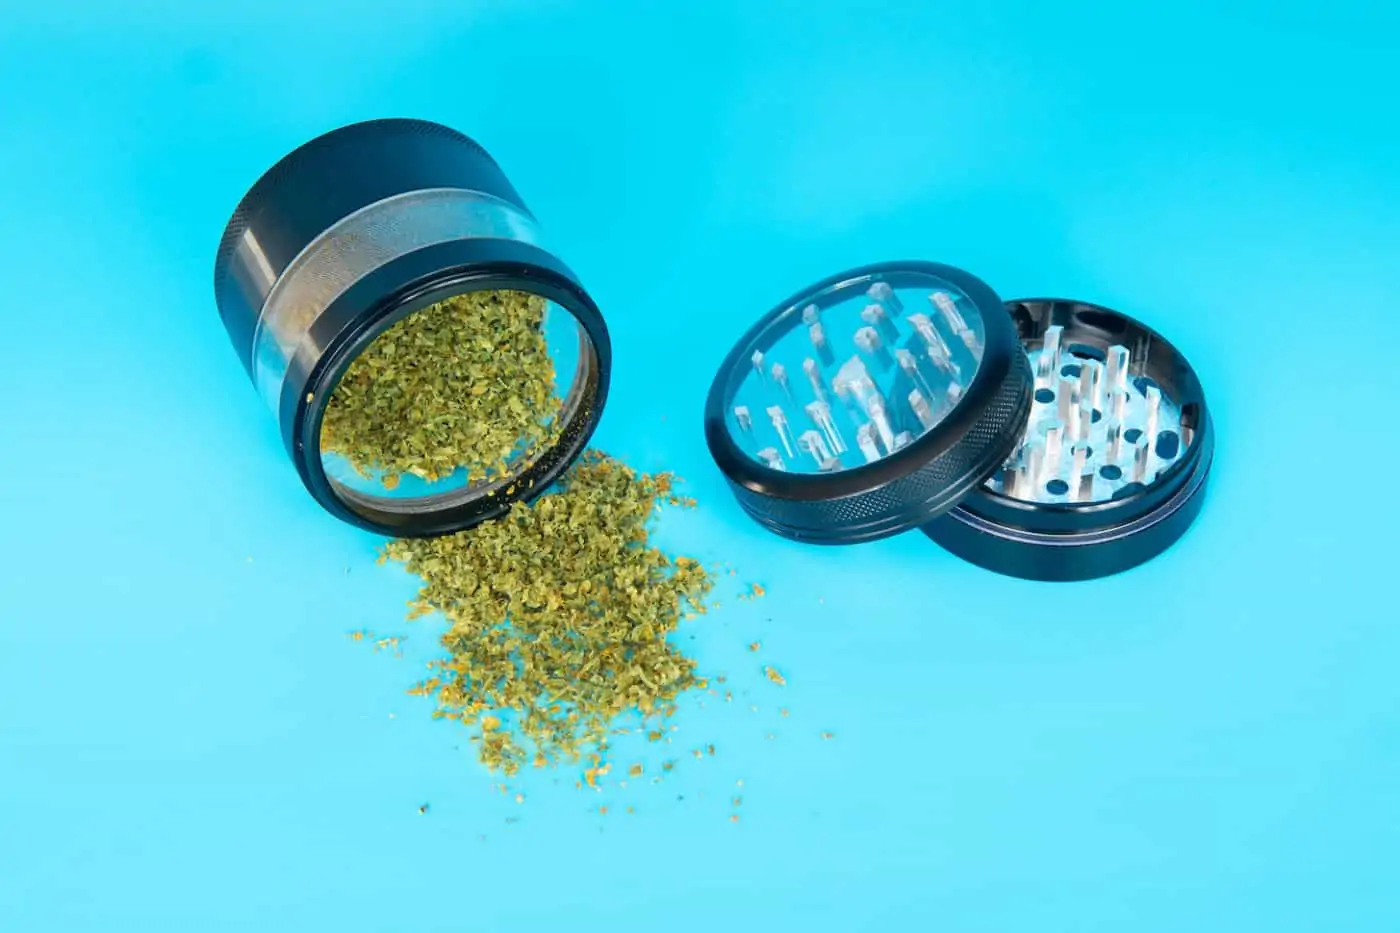 5 Tips to Breaking Up Cannabis Without a Weed Grinder